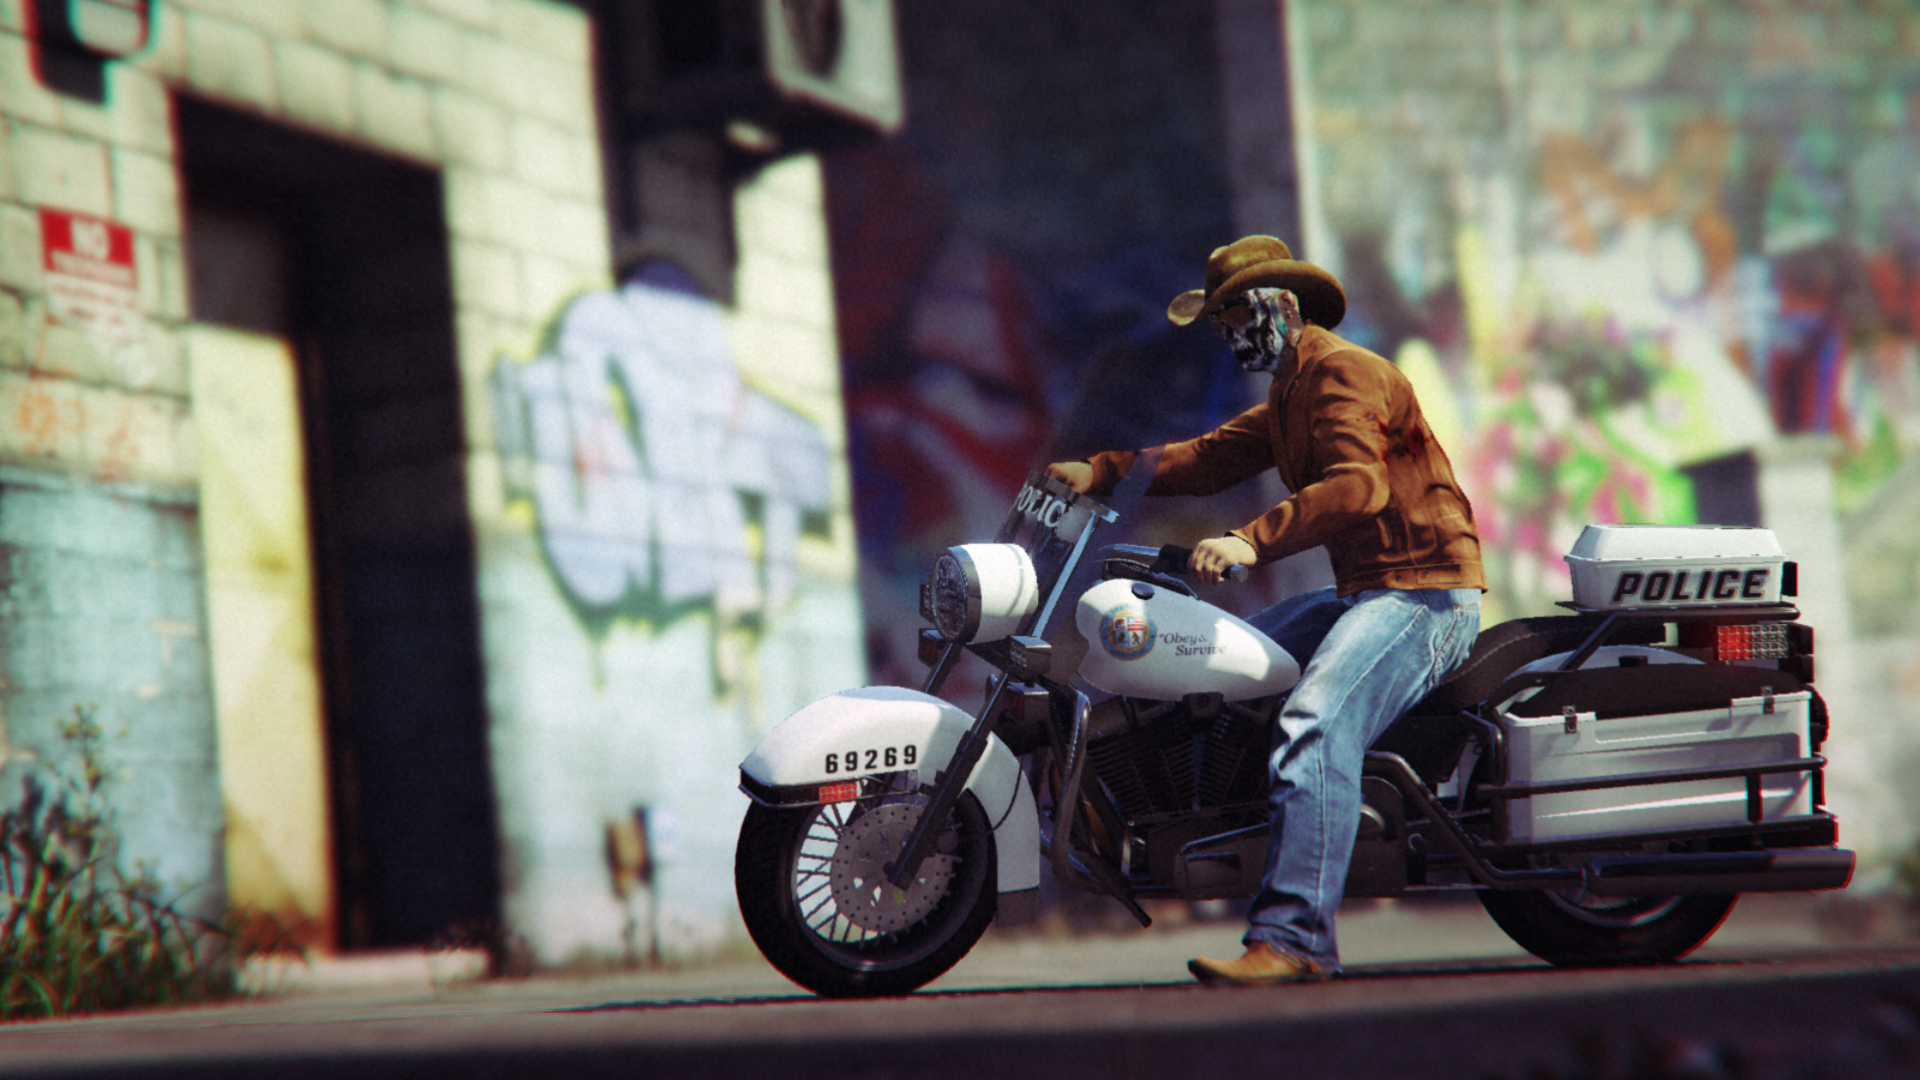 General 1920x1080 Grand Theft Auto V Grand Theft Auto Online Rockstar Games town alleyway chopper video games